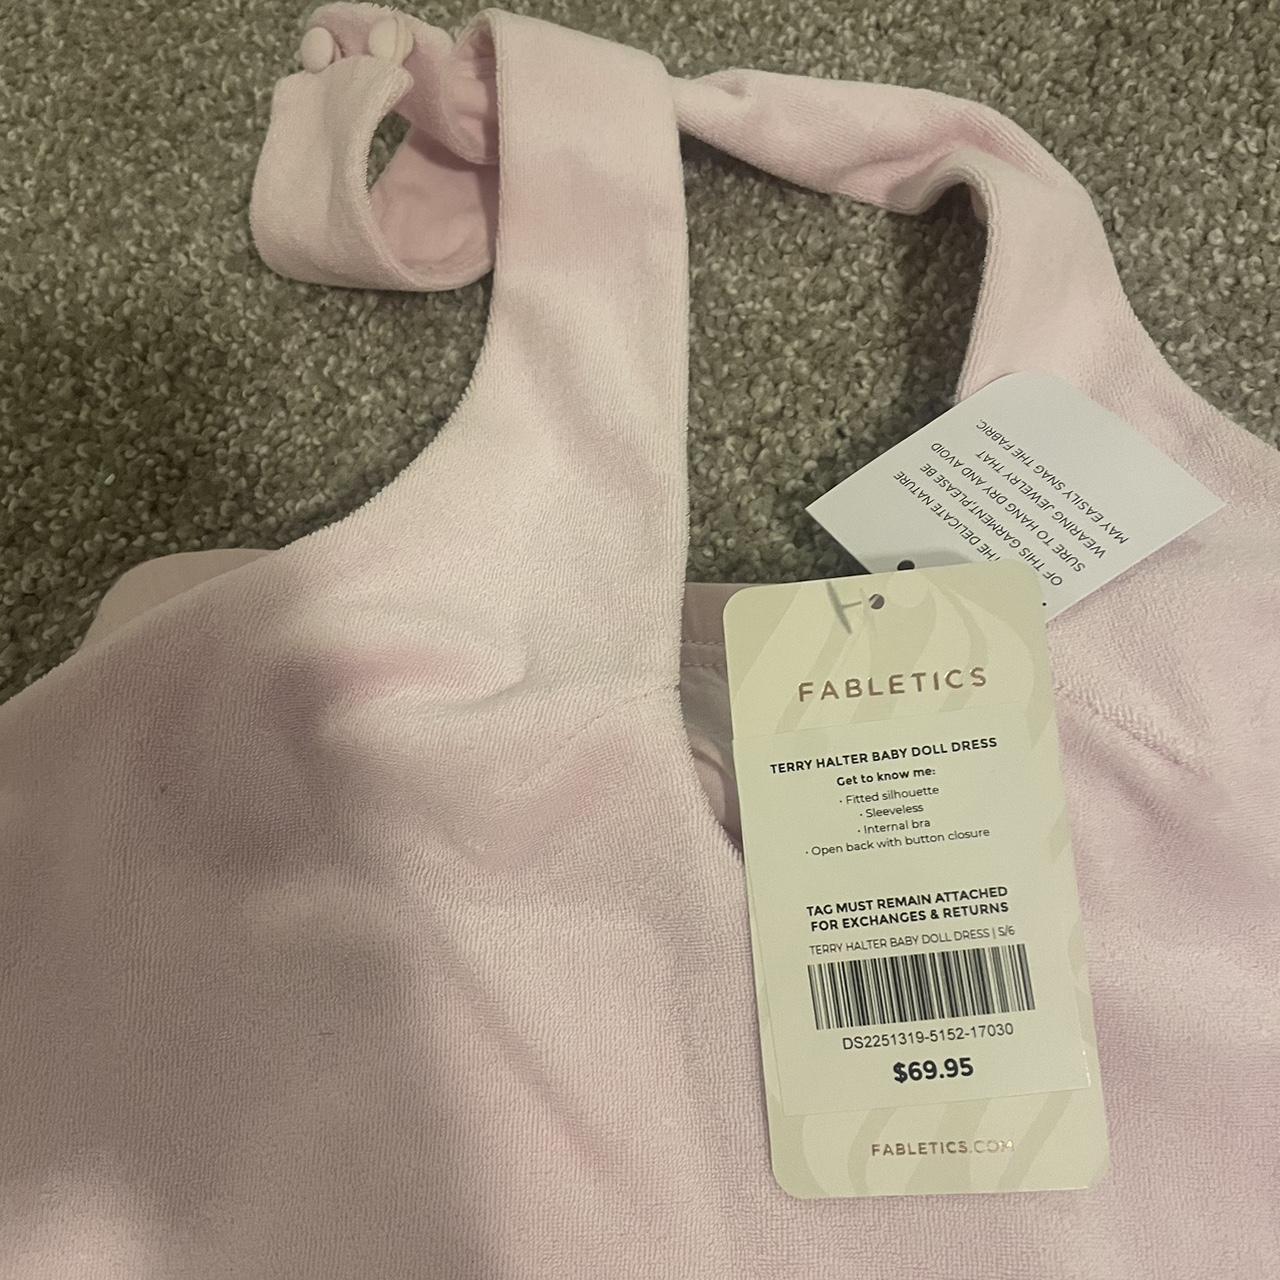 Terry Halter Baby Doll Dress - Fabletics